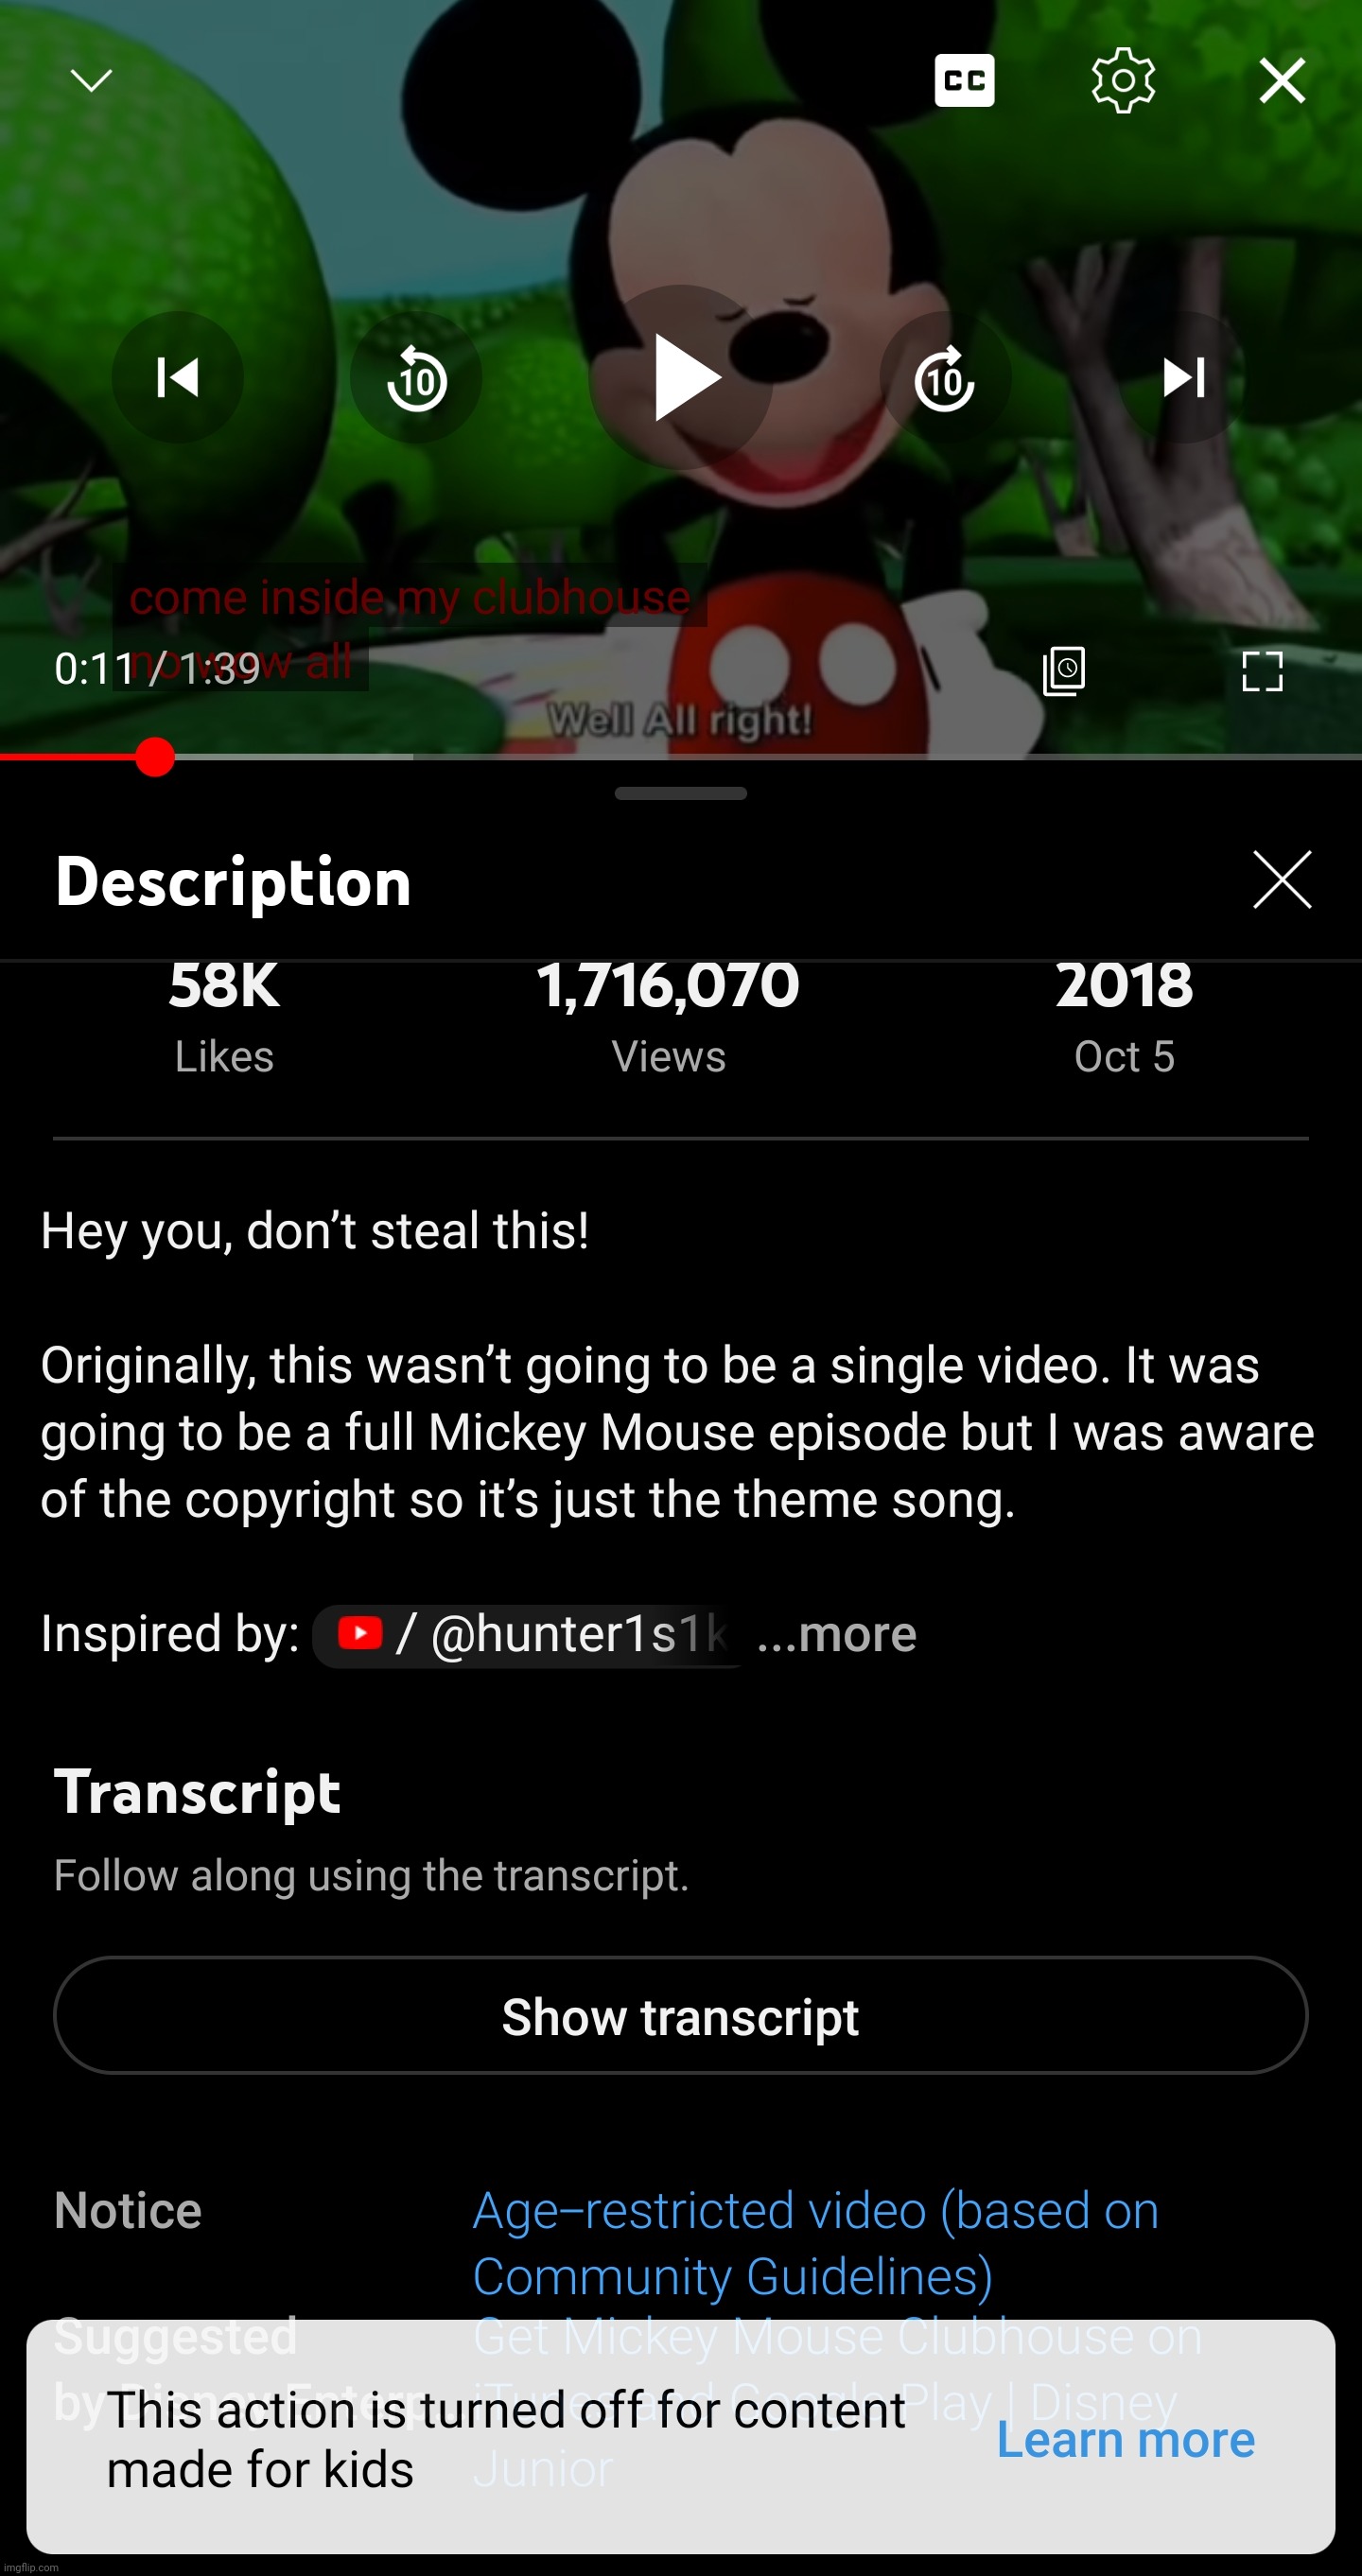 Mickey Mouse Clubhouse Memes - Imgflip